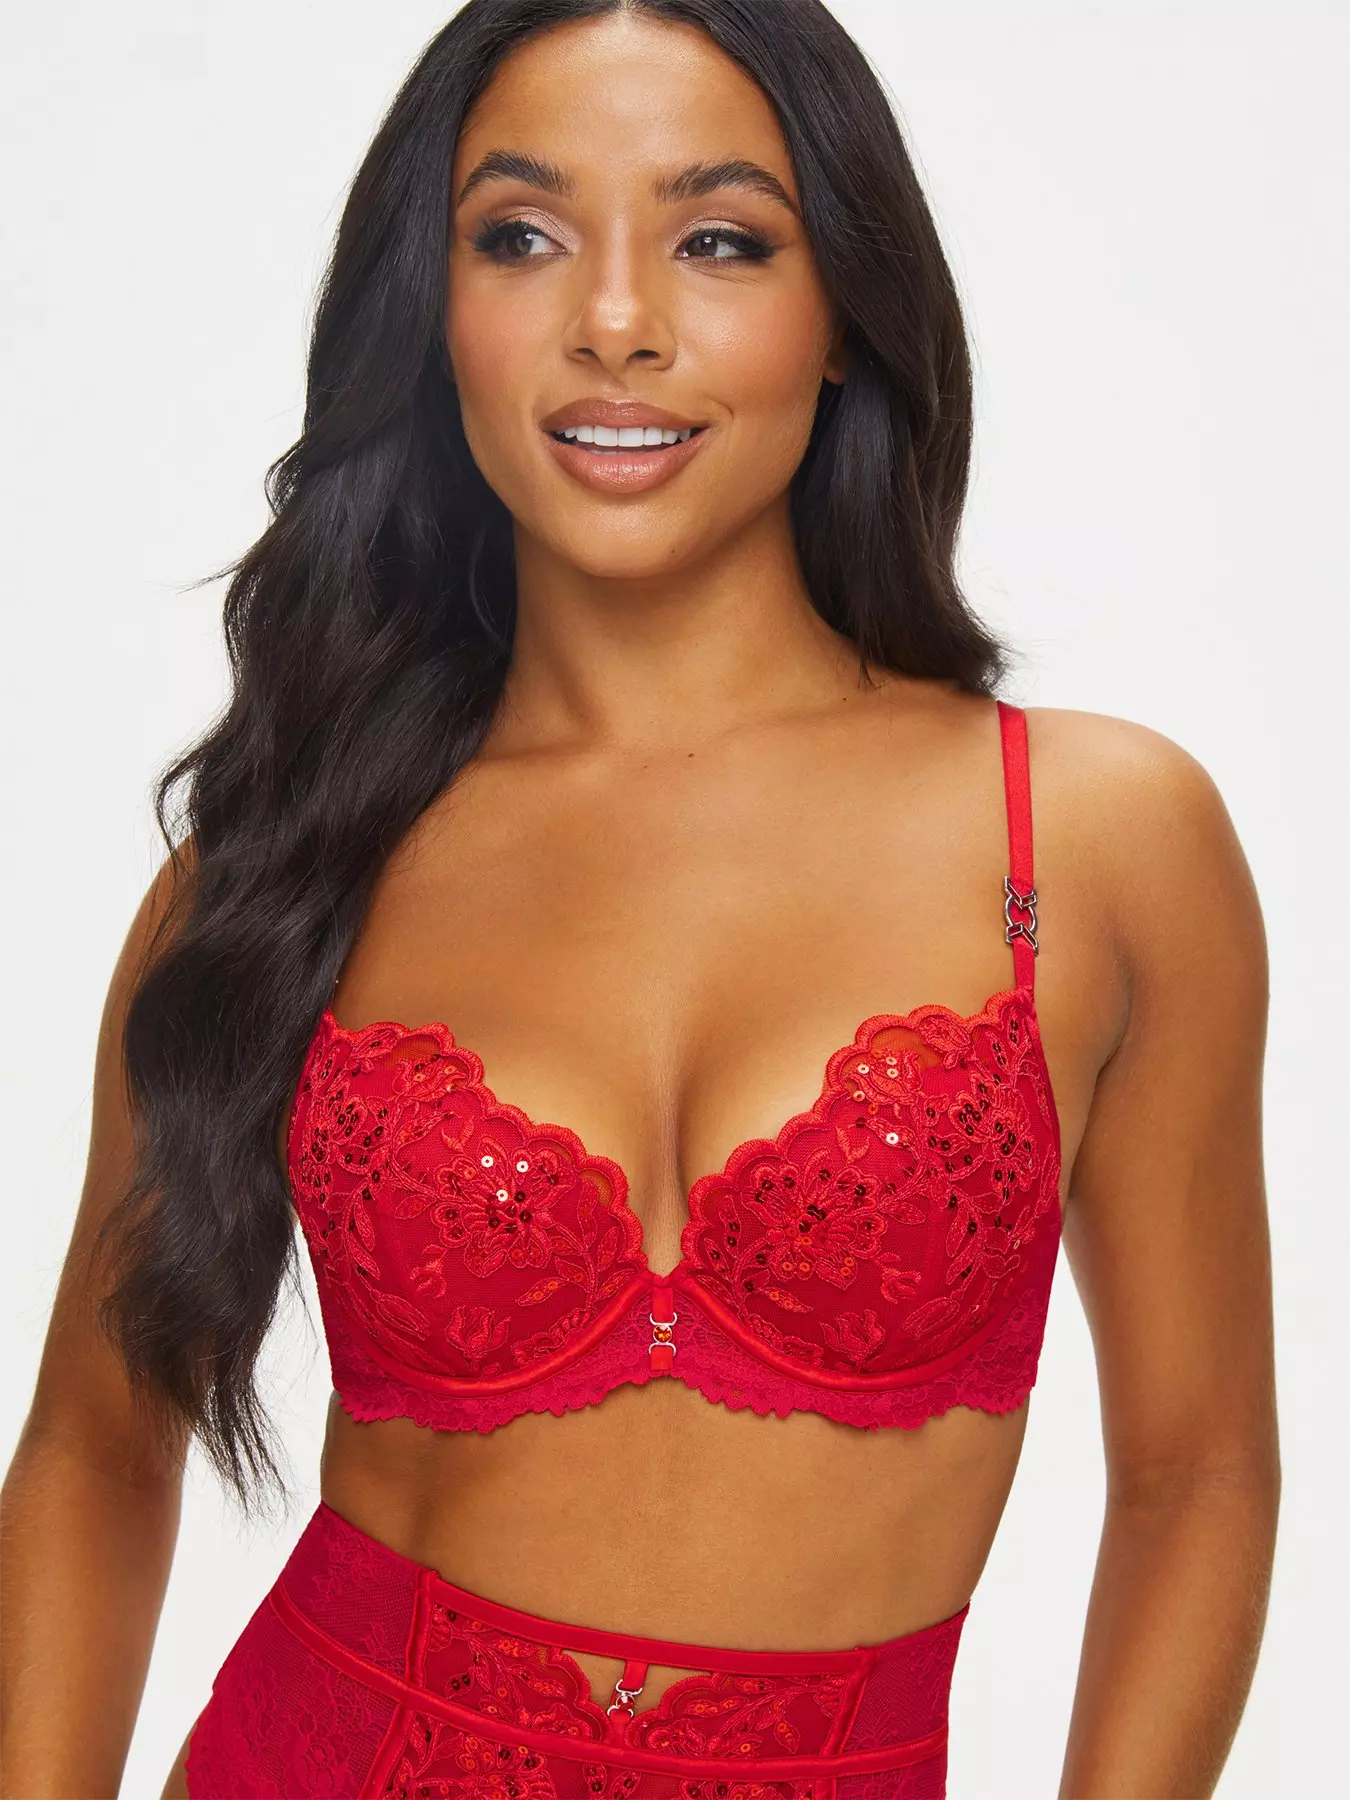 ANN SUMMERS RED Underwired Non Padded Pre-Owned Bra Size 38DD £7.99 -  PicClick UK